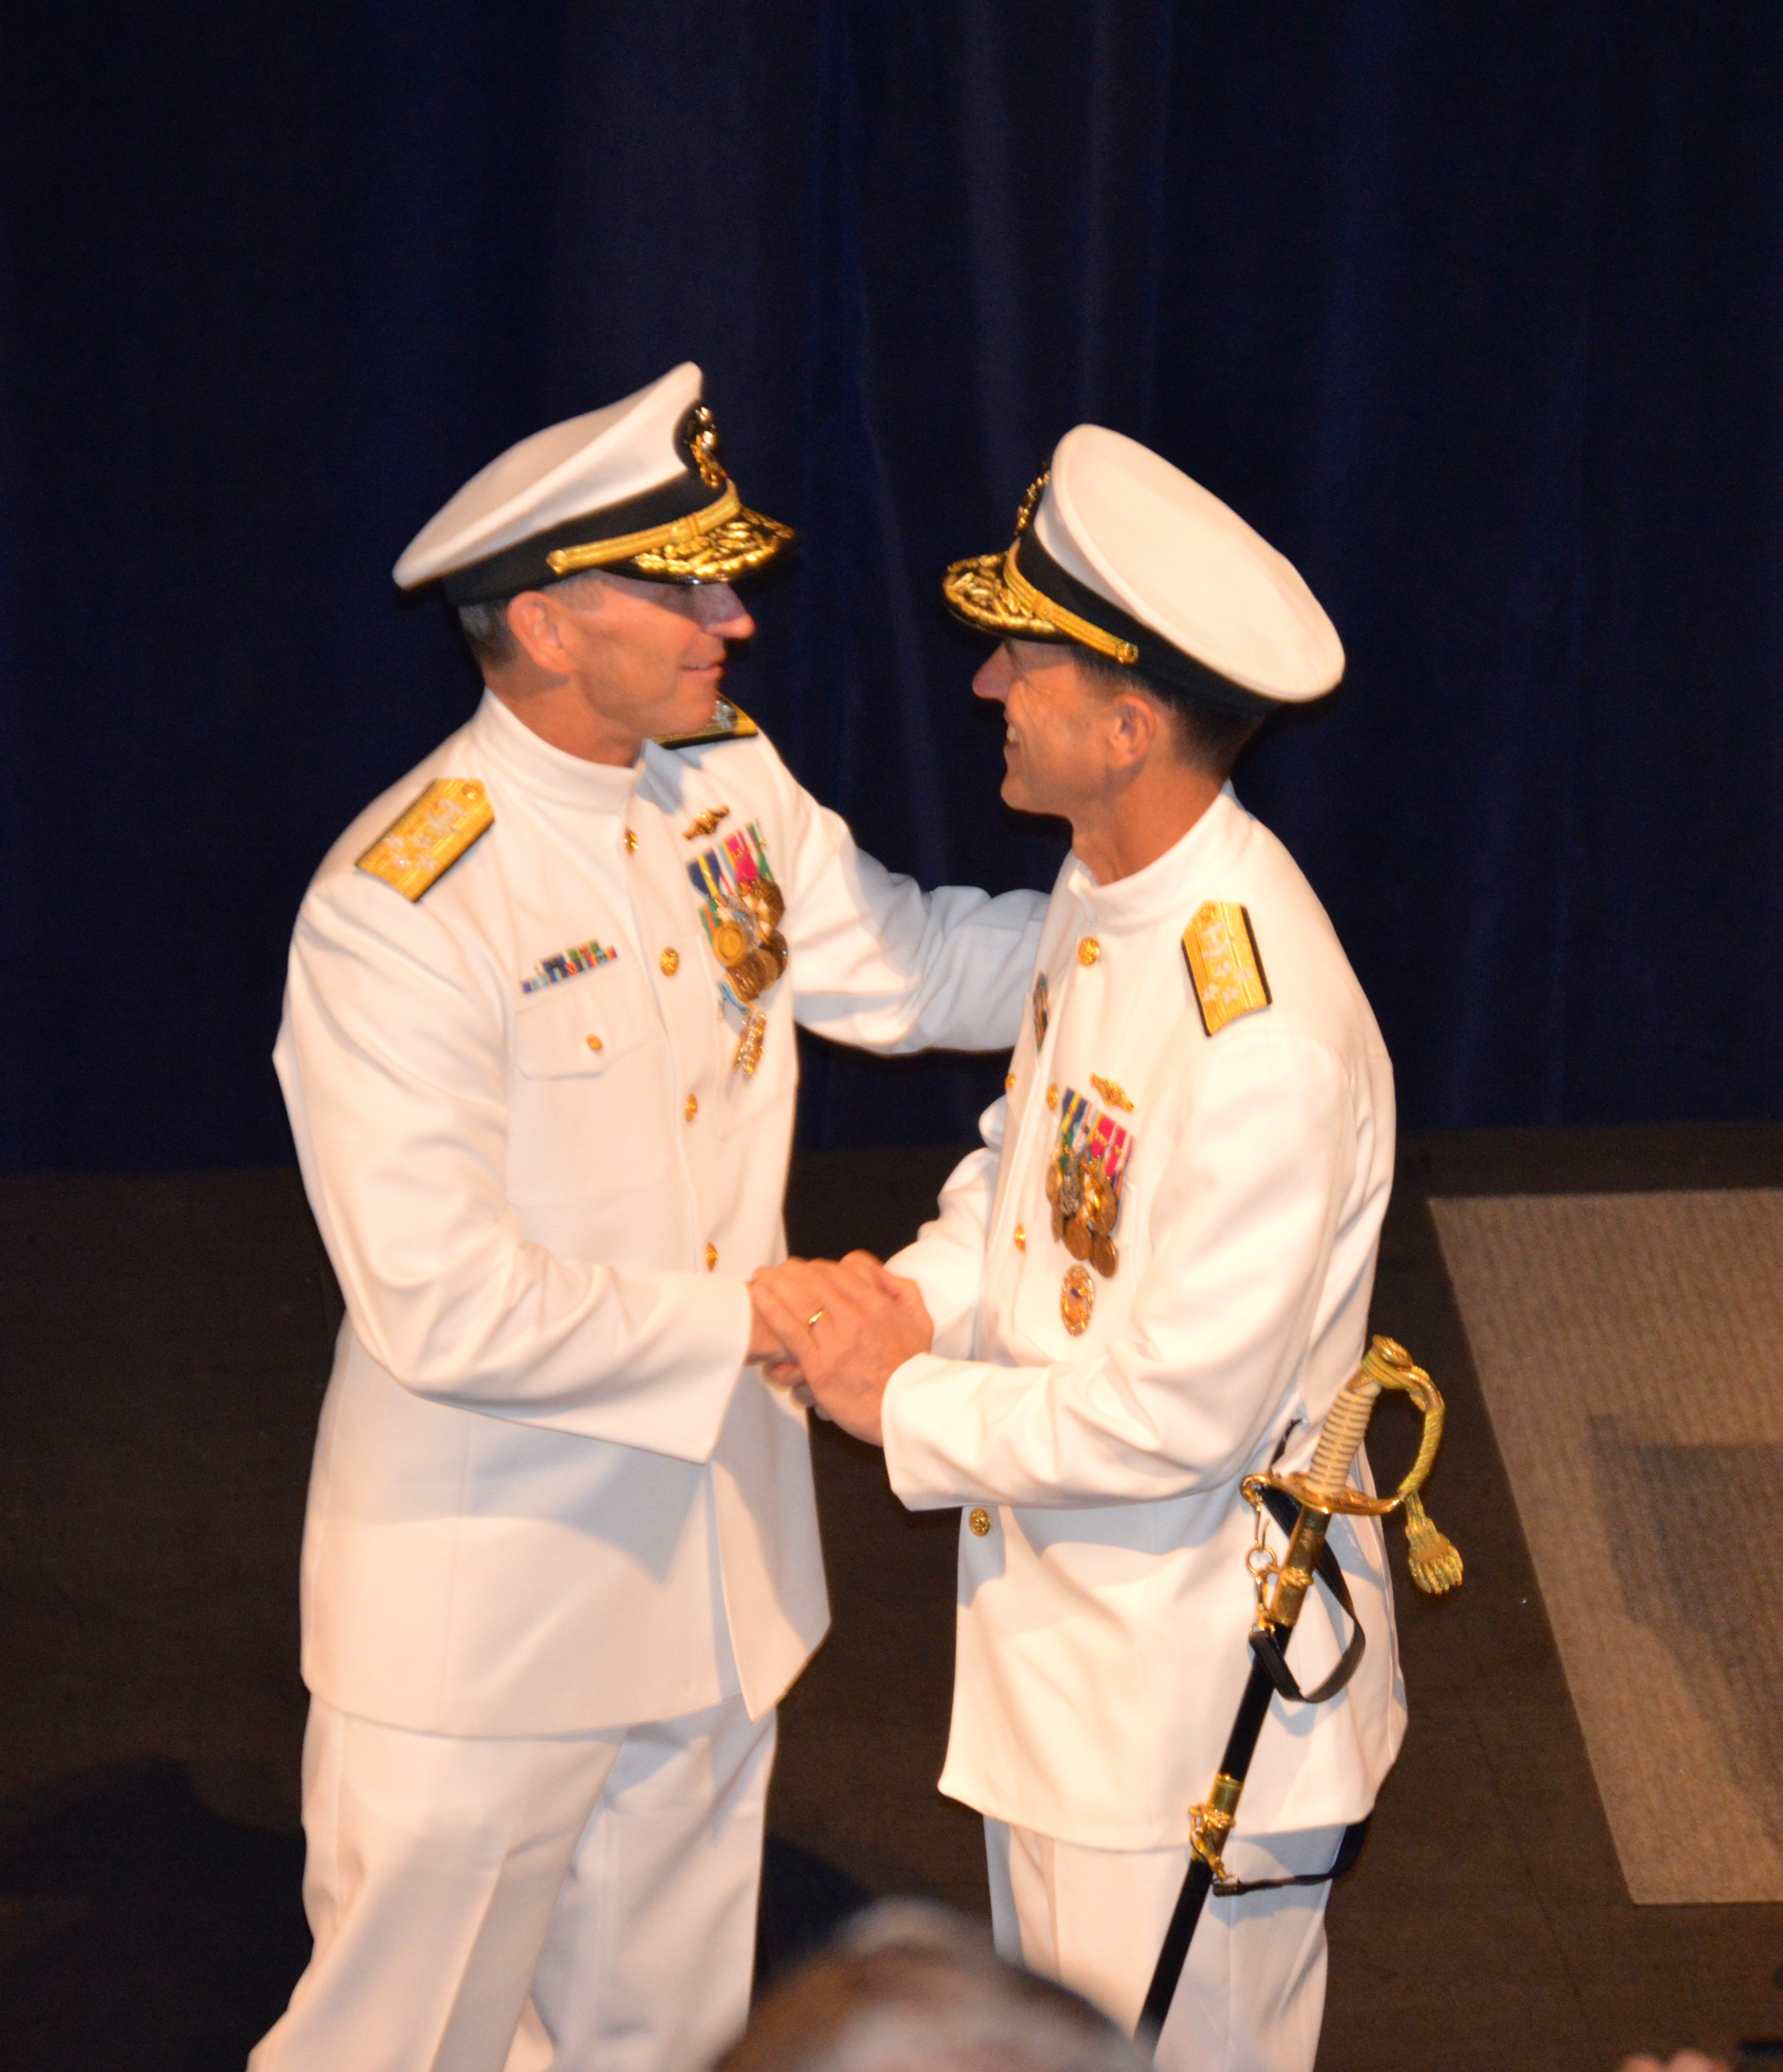 Outgoing Chief of Naval Operations Adm. Jonathan Greenert, left, and incoming CNO Adm. John Richardson, right, congratulate each other during the change of command ceremony. USNI News photo.